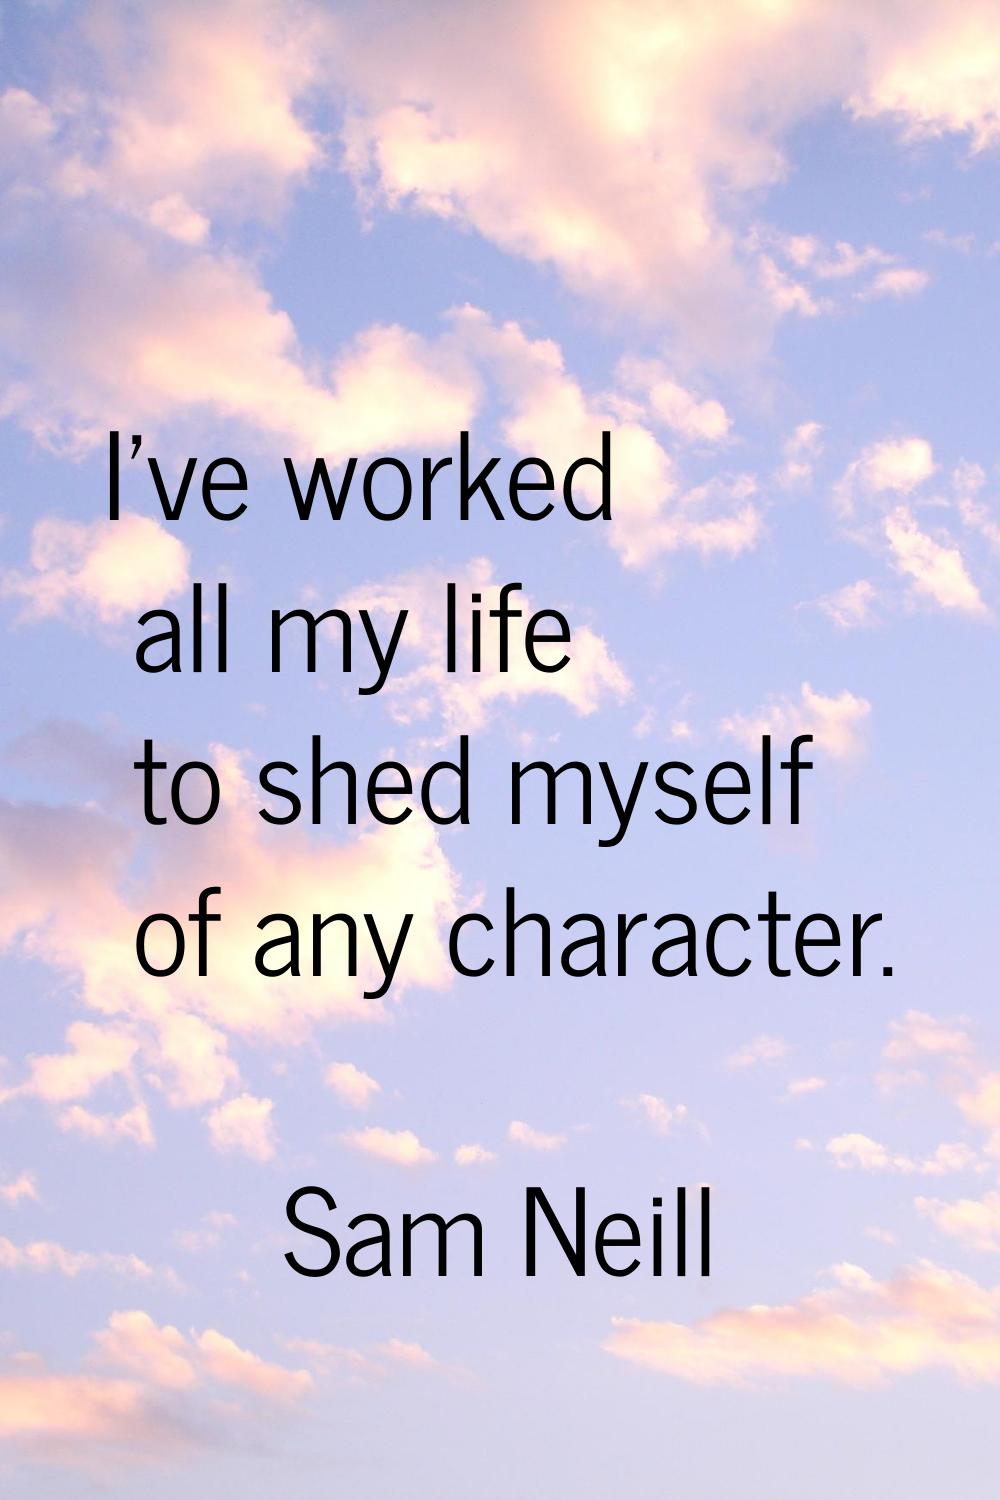 I've worked all my life to shed myself of any character.